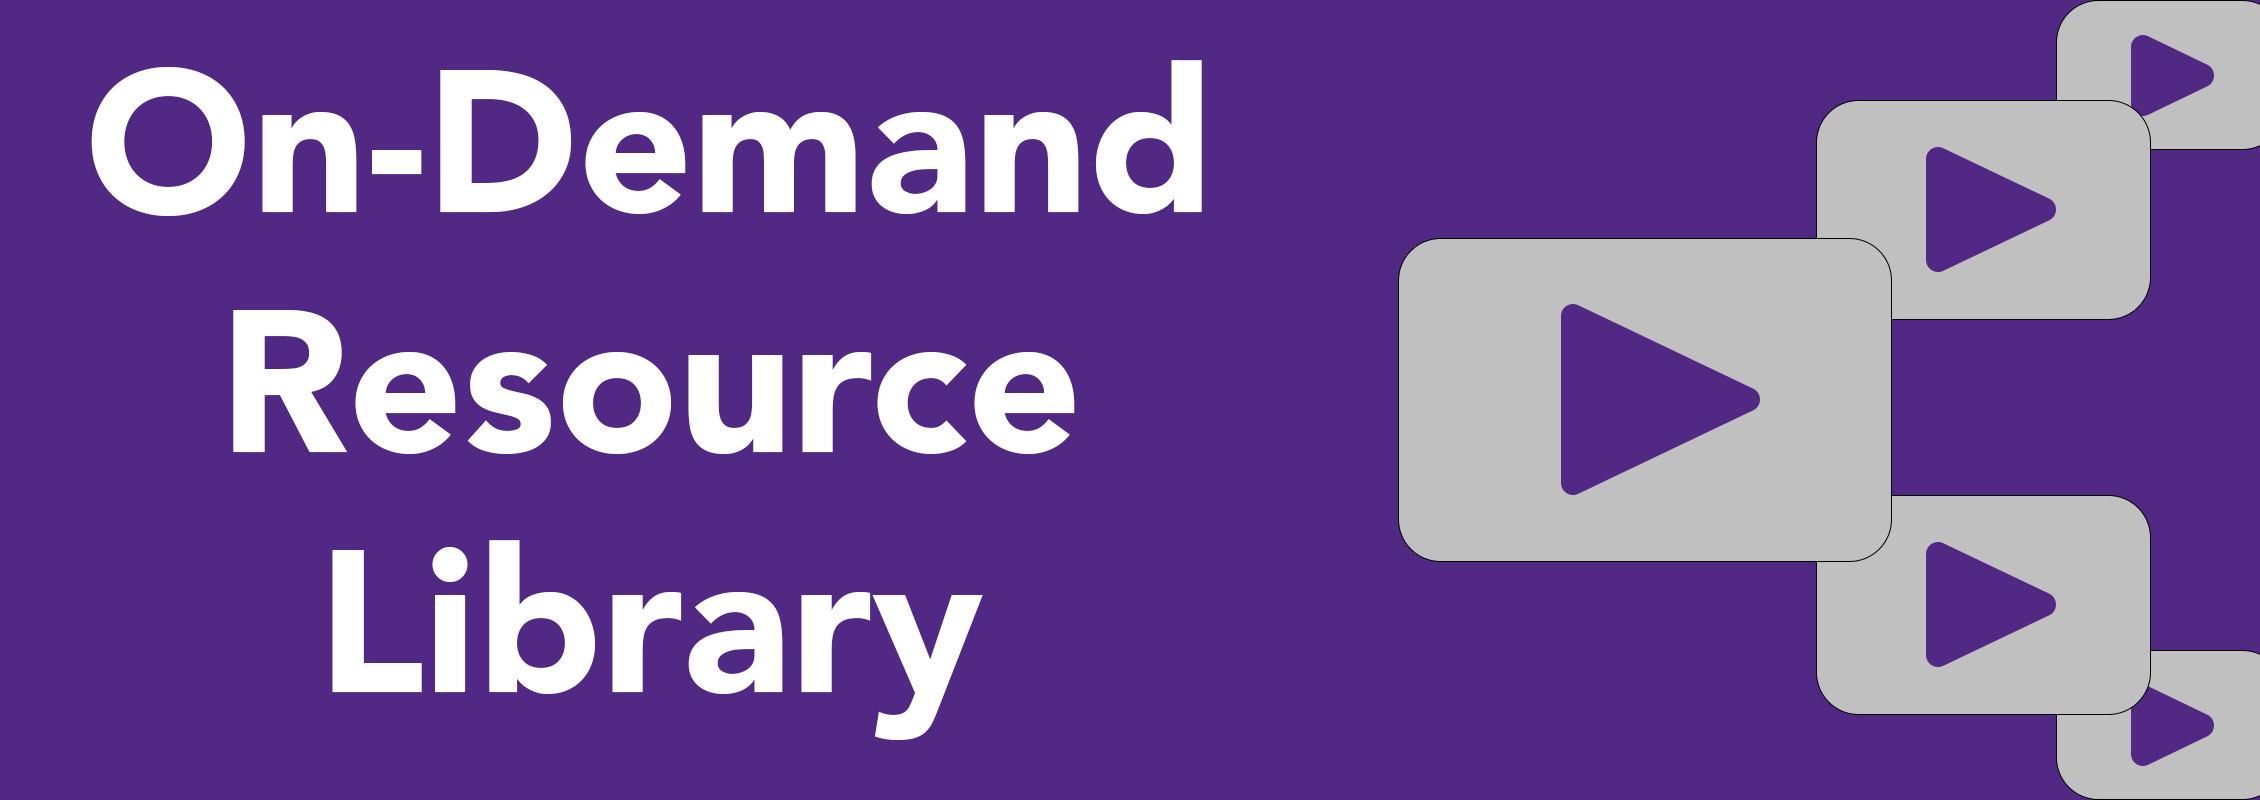 Icon depicting on-demand resources